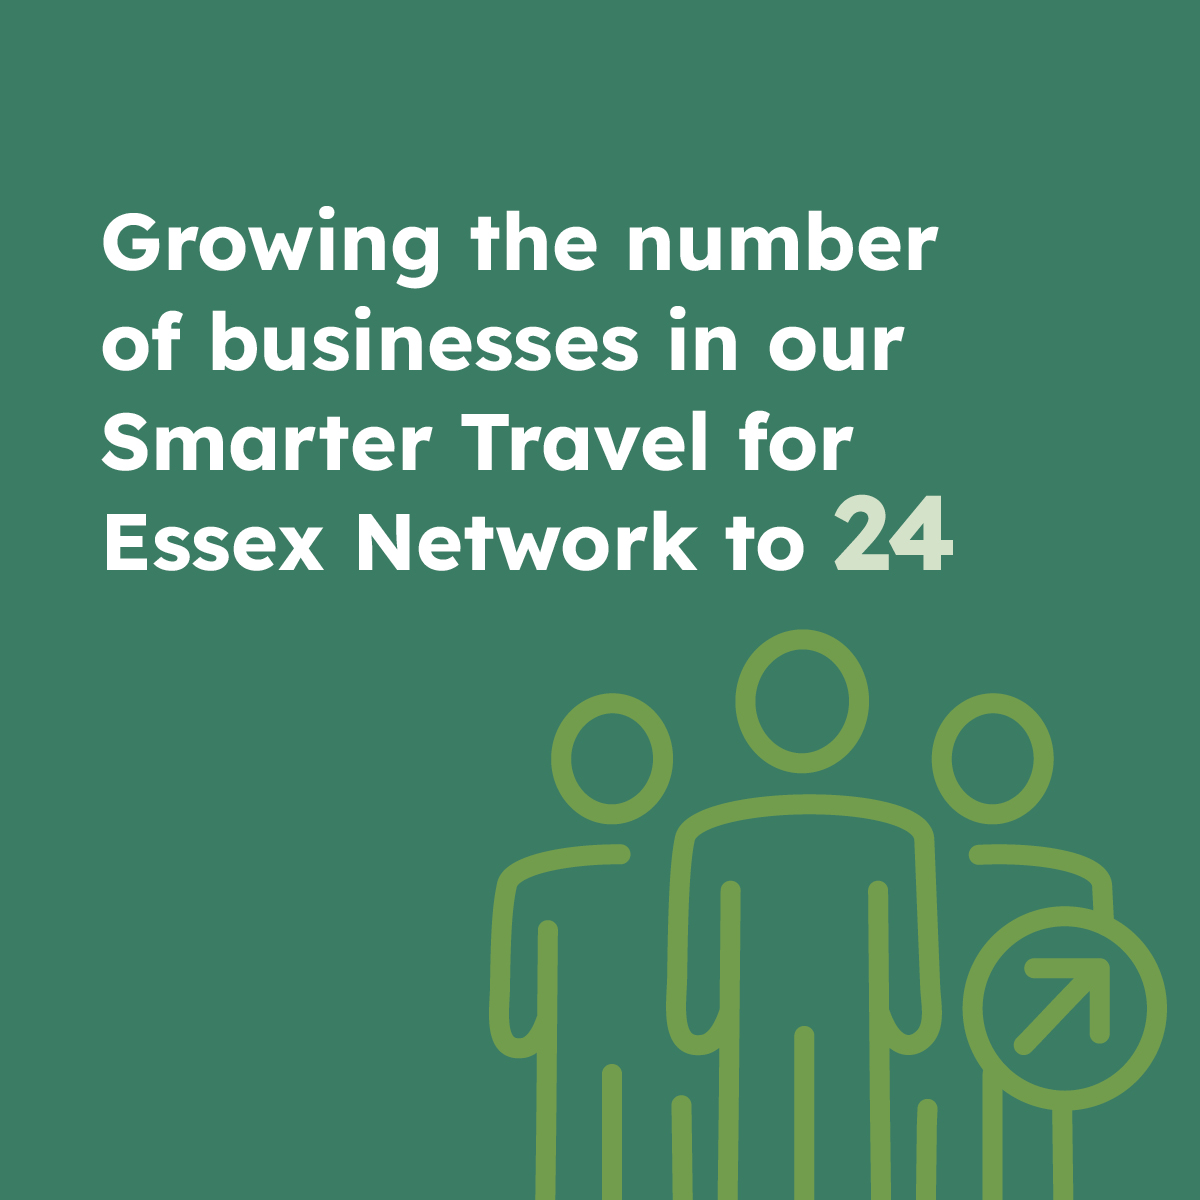 Growing the number of businesses in our Smarter Travel for Essex Network to 24